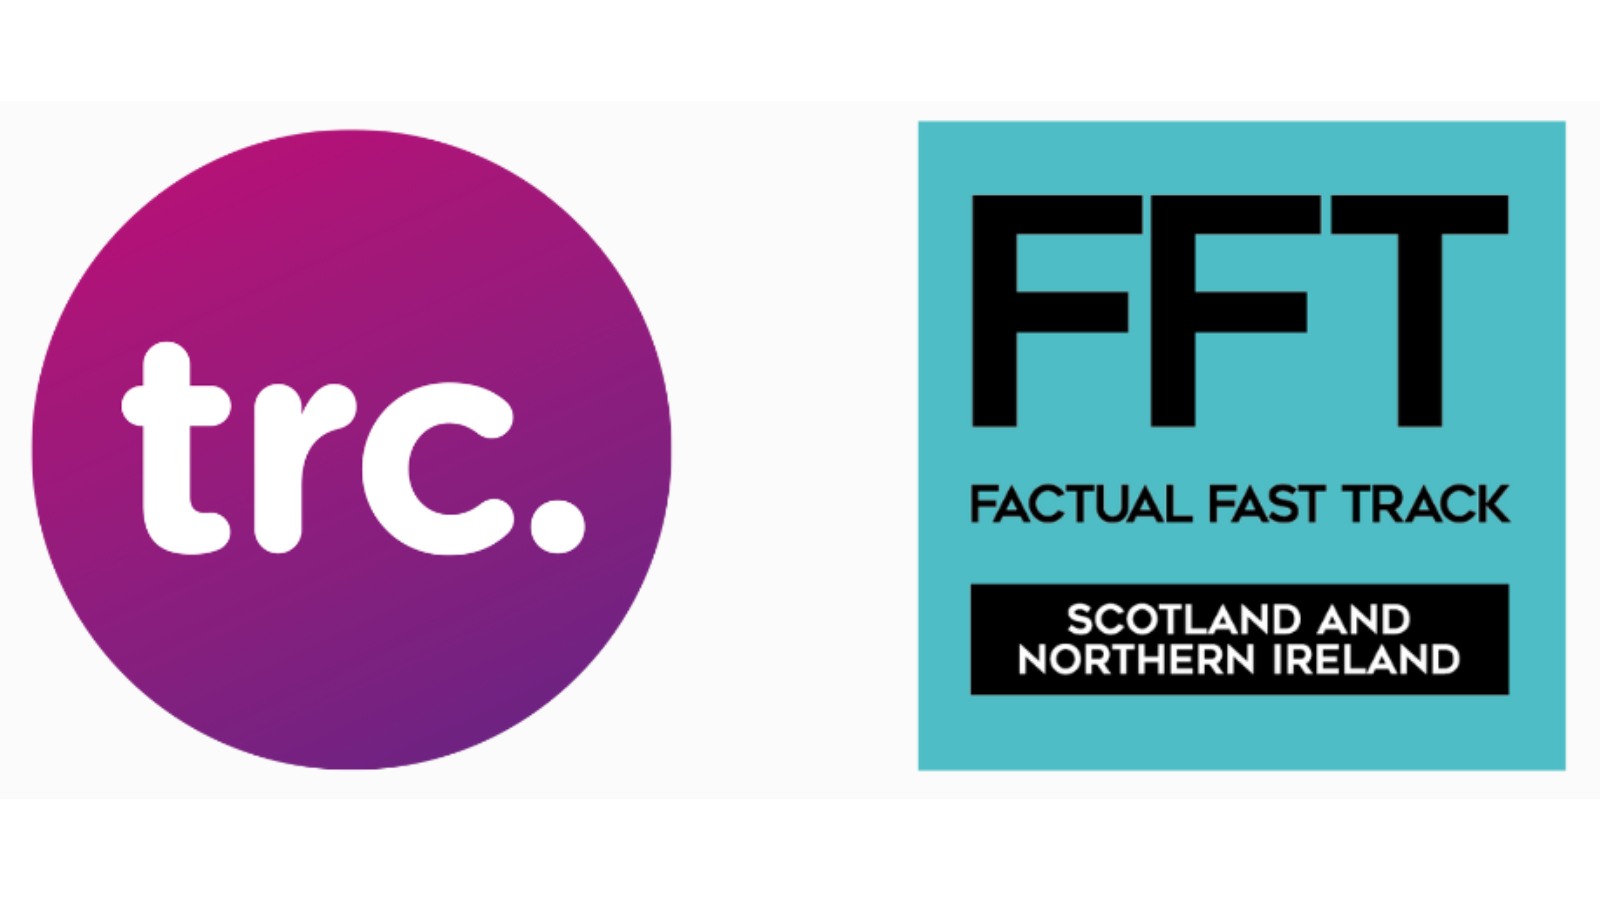 TRC logo side by side with Factual Fast Track logo. Text reads Factual Fast Track Scotland and Northern Ireland